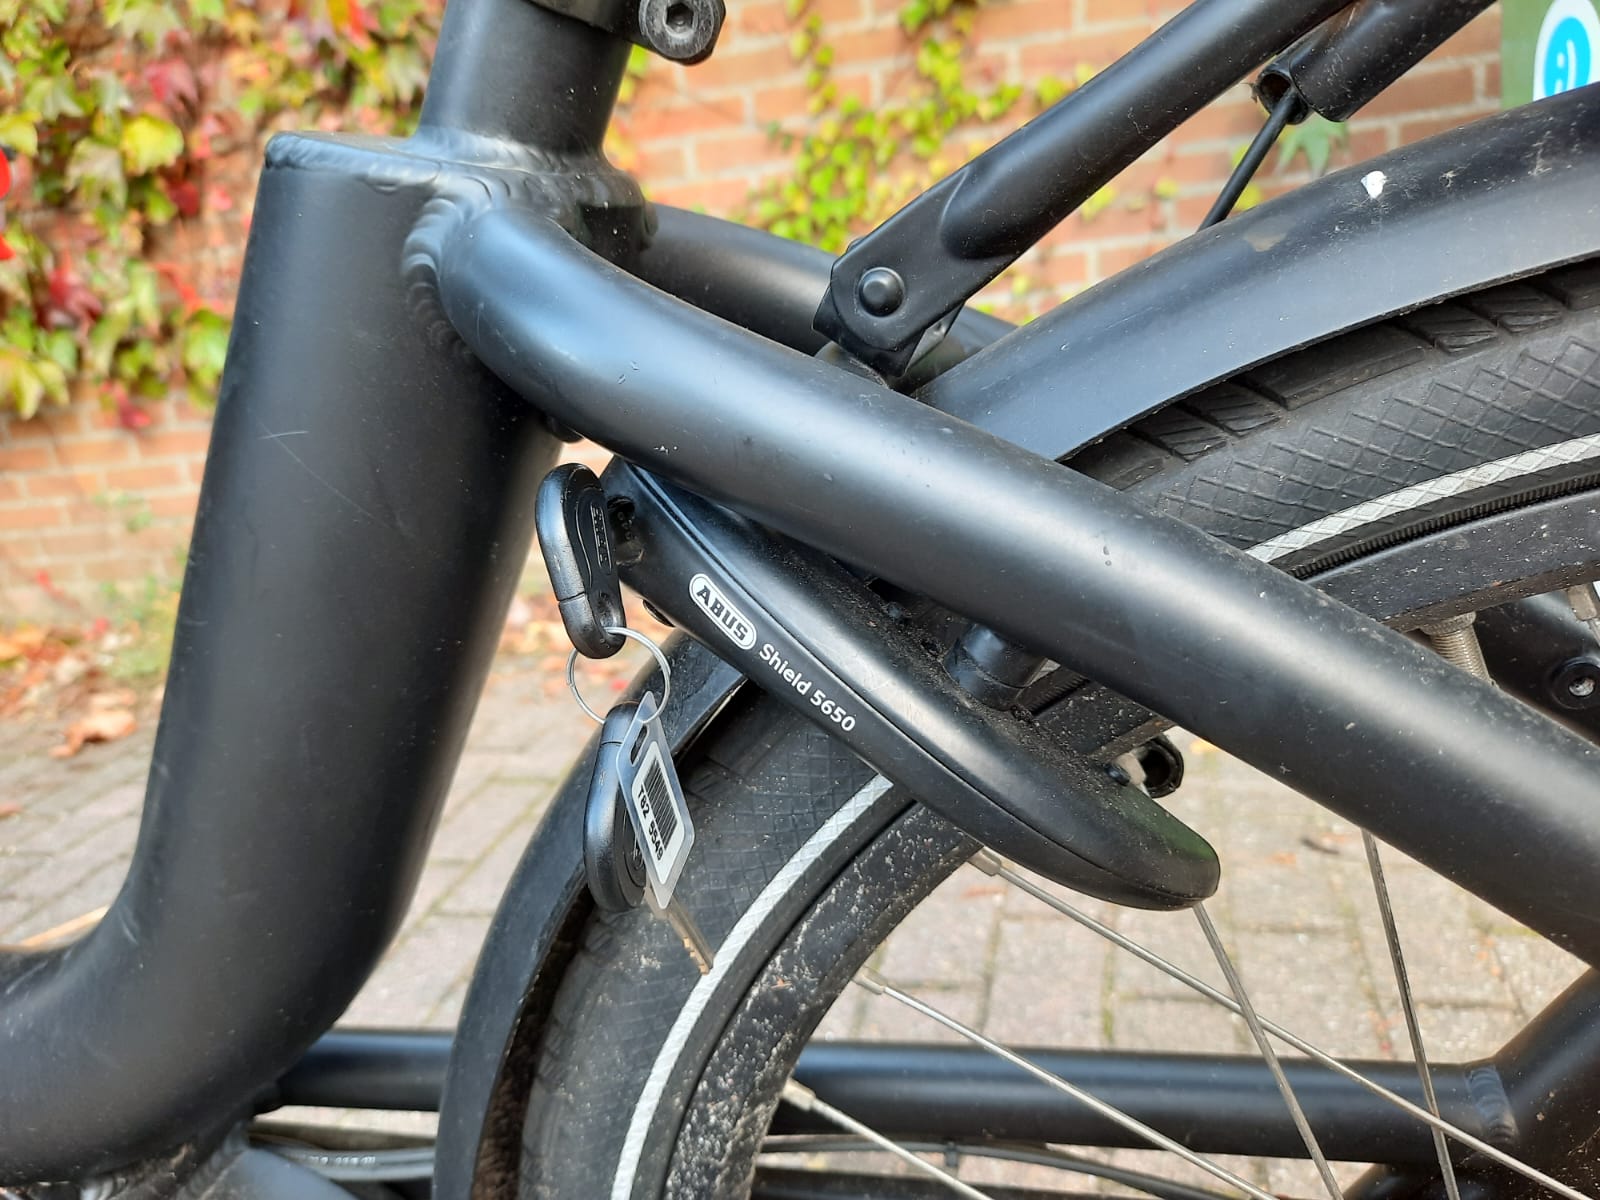 This easy bike lock comes handy when stopping for short periods, but a more heavy-duty chain is recommended for extra security